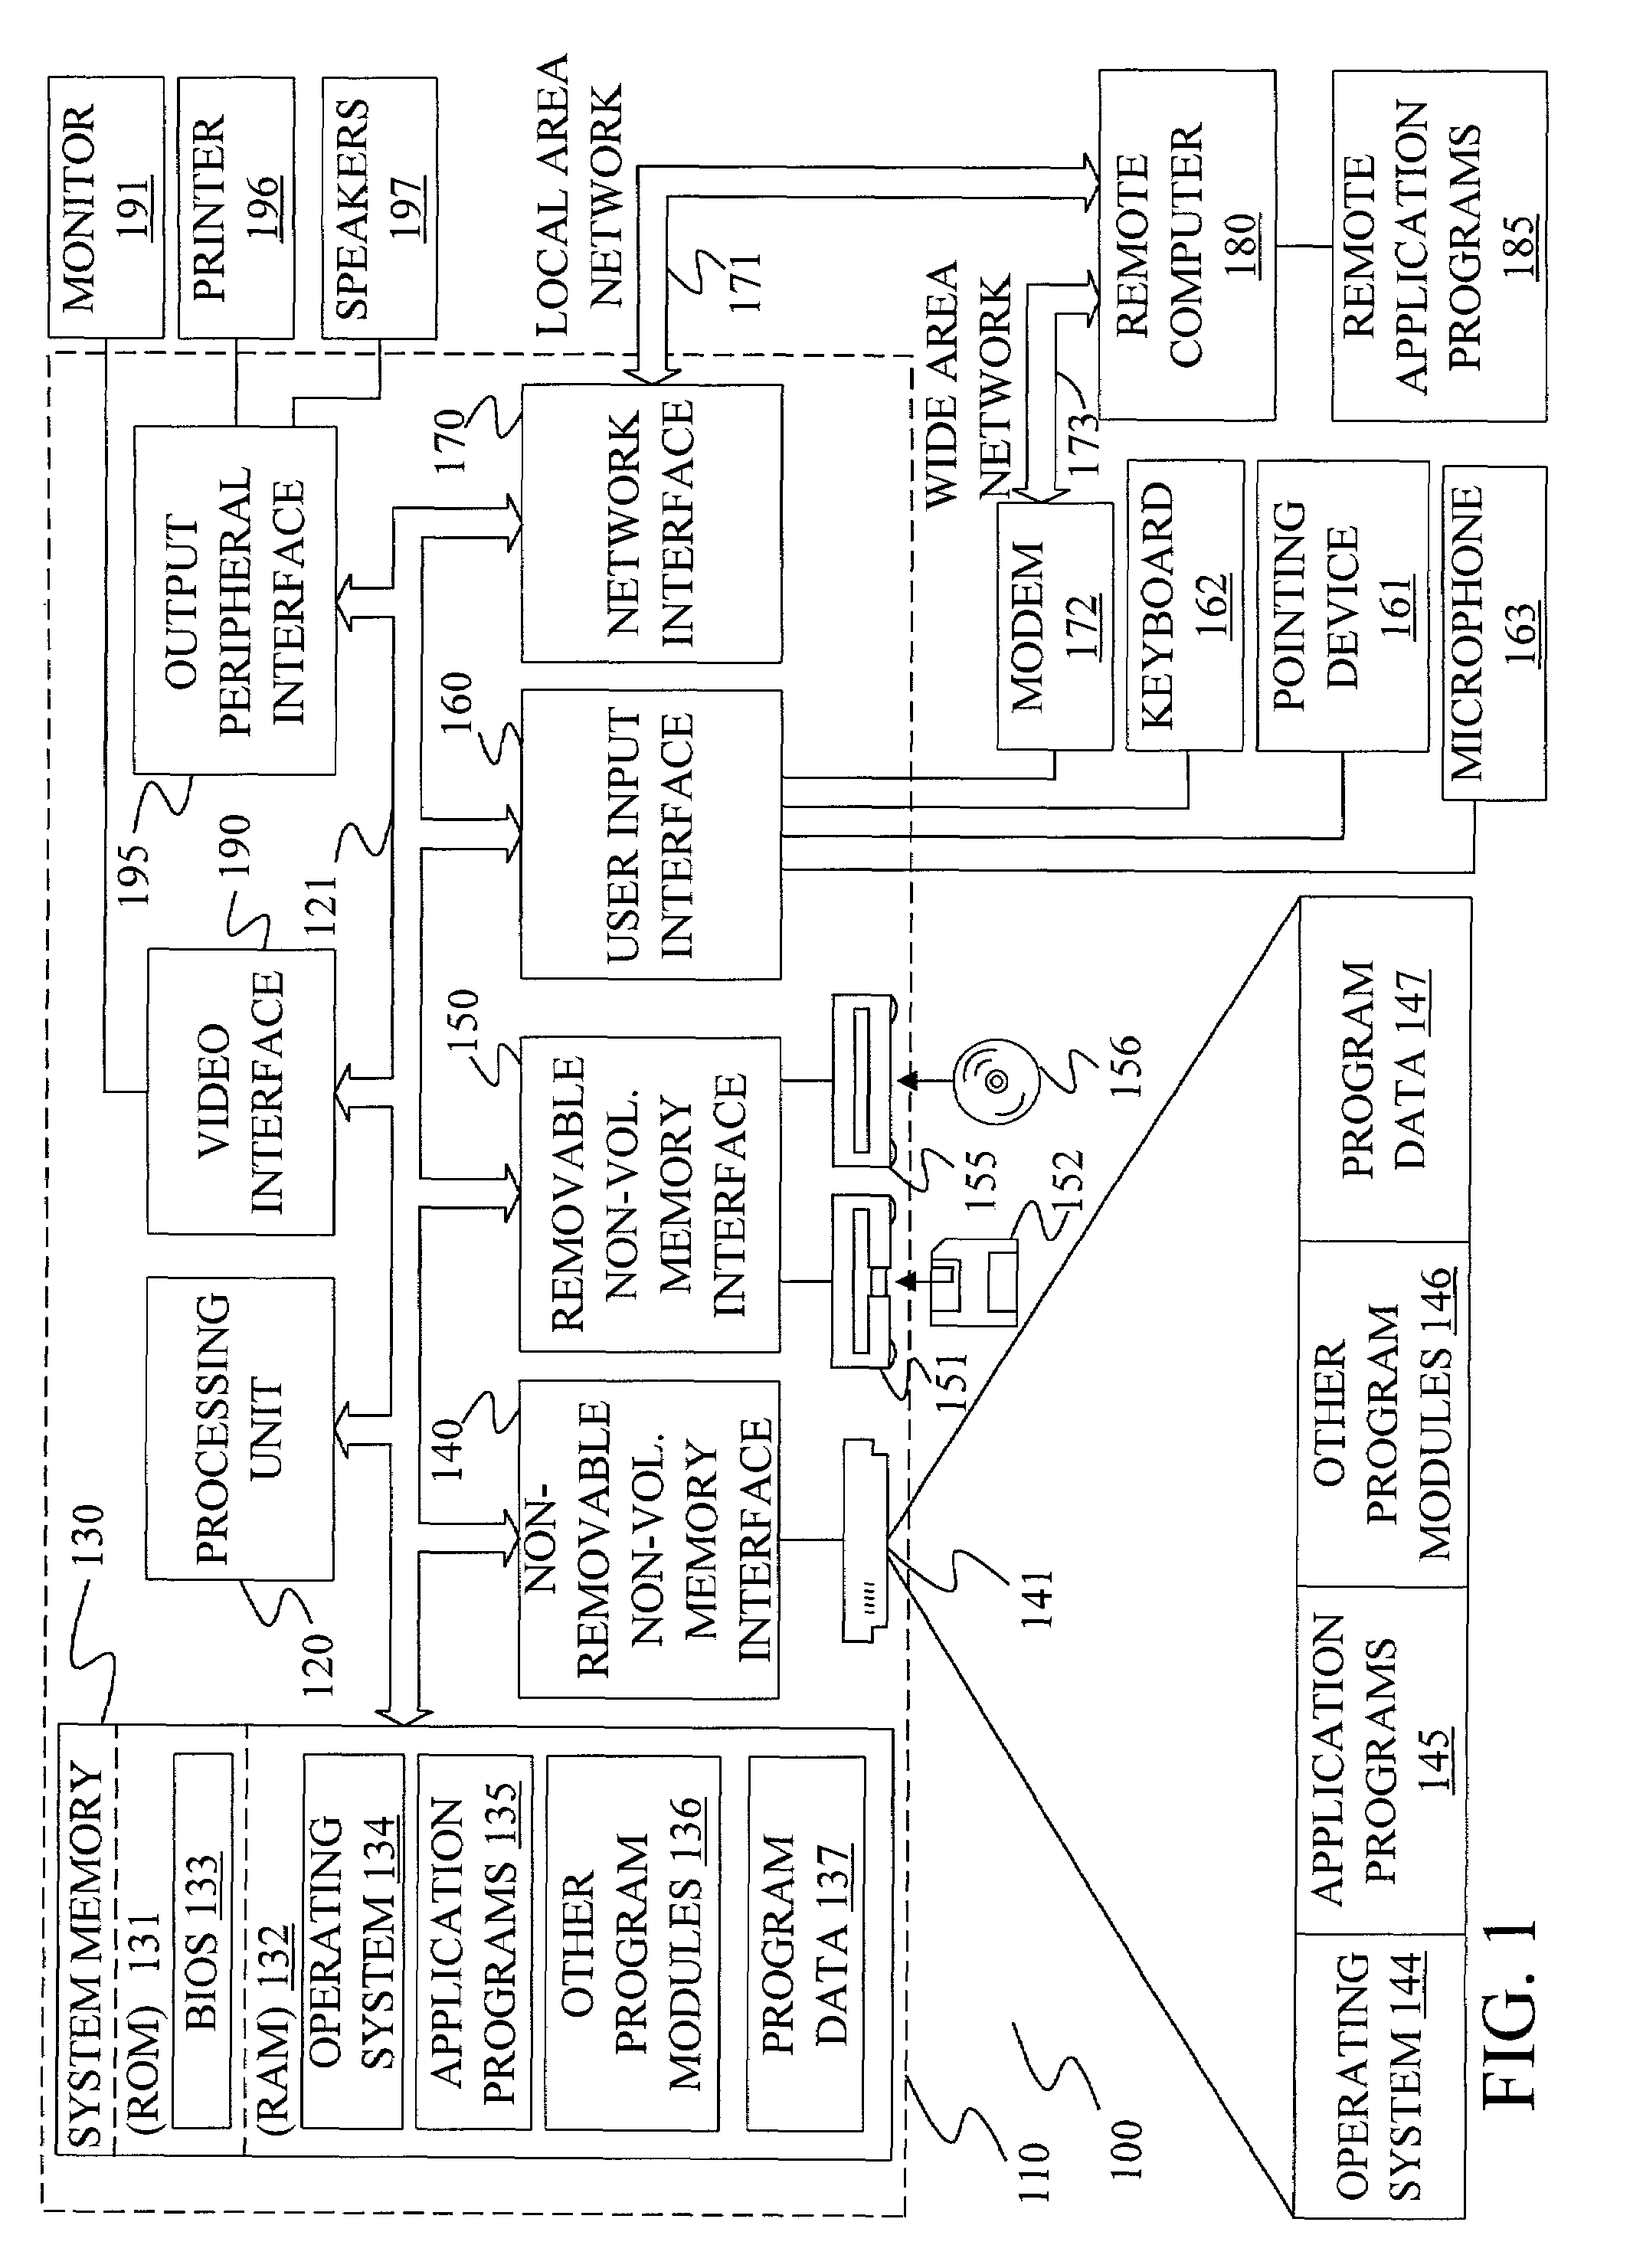 Method and apparatus utilizing speech grammar rules written in a markup language